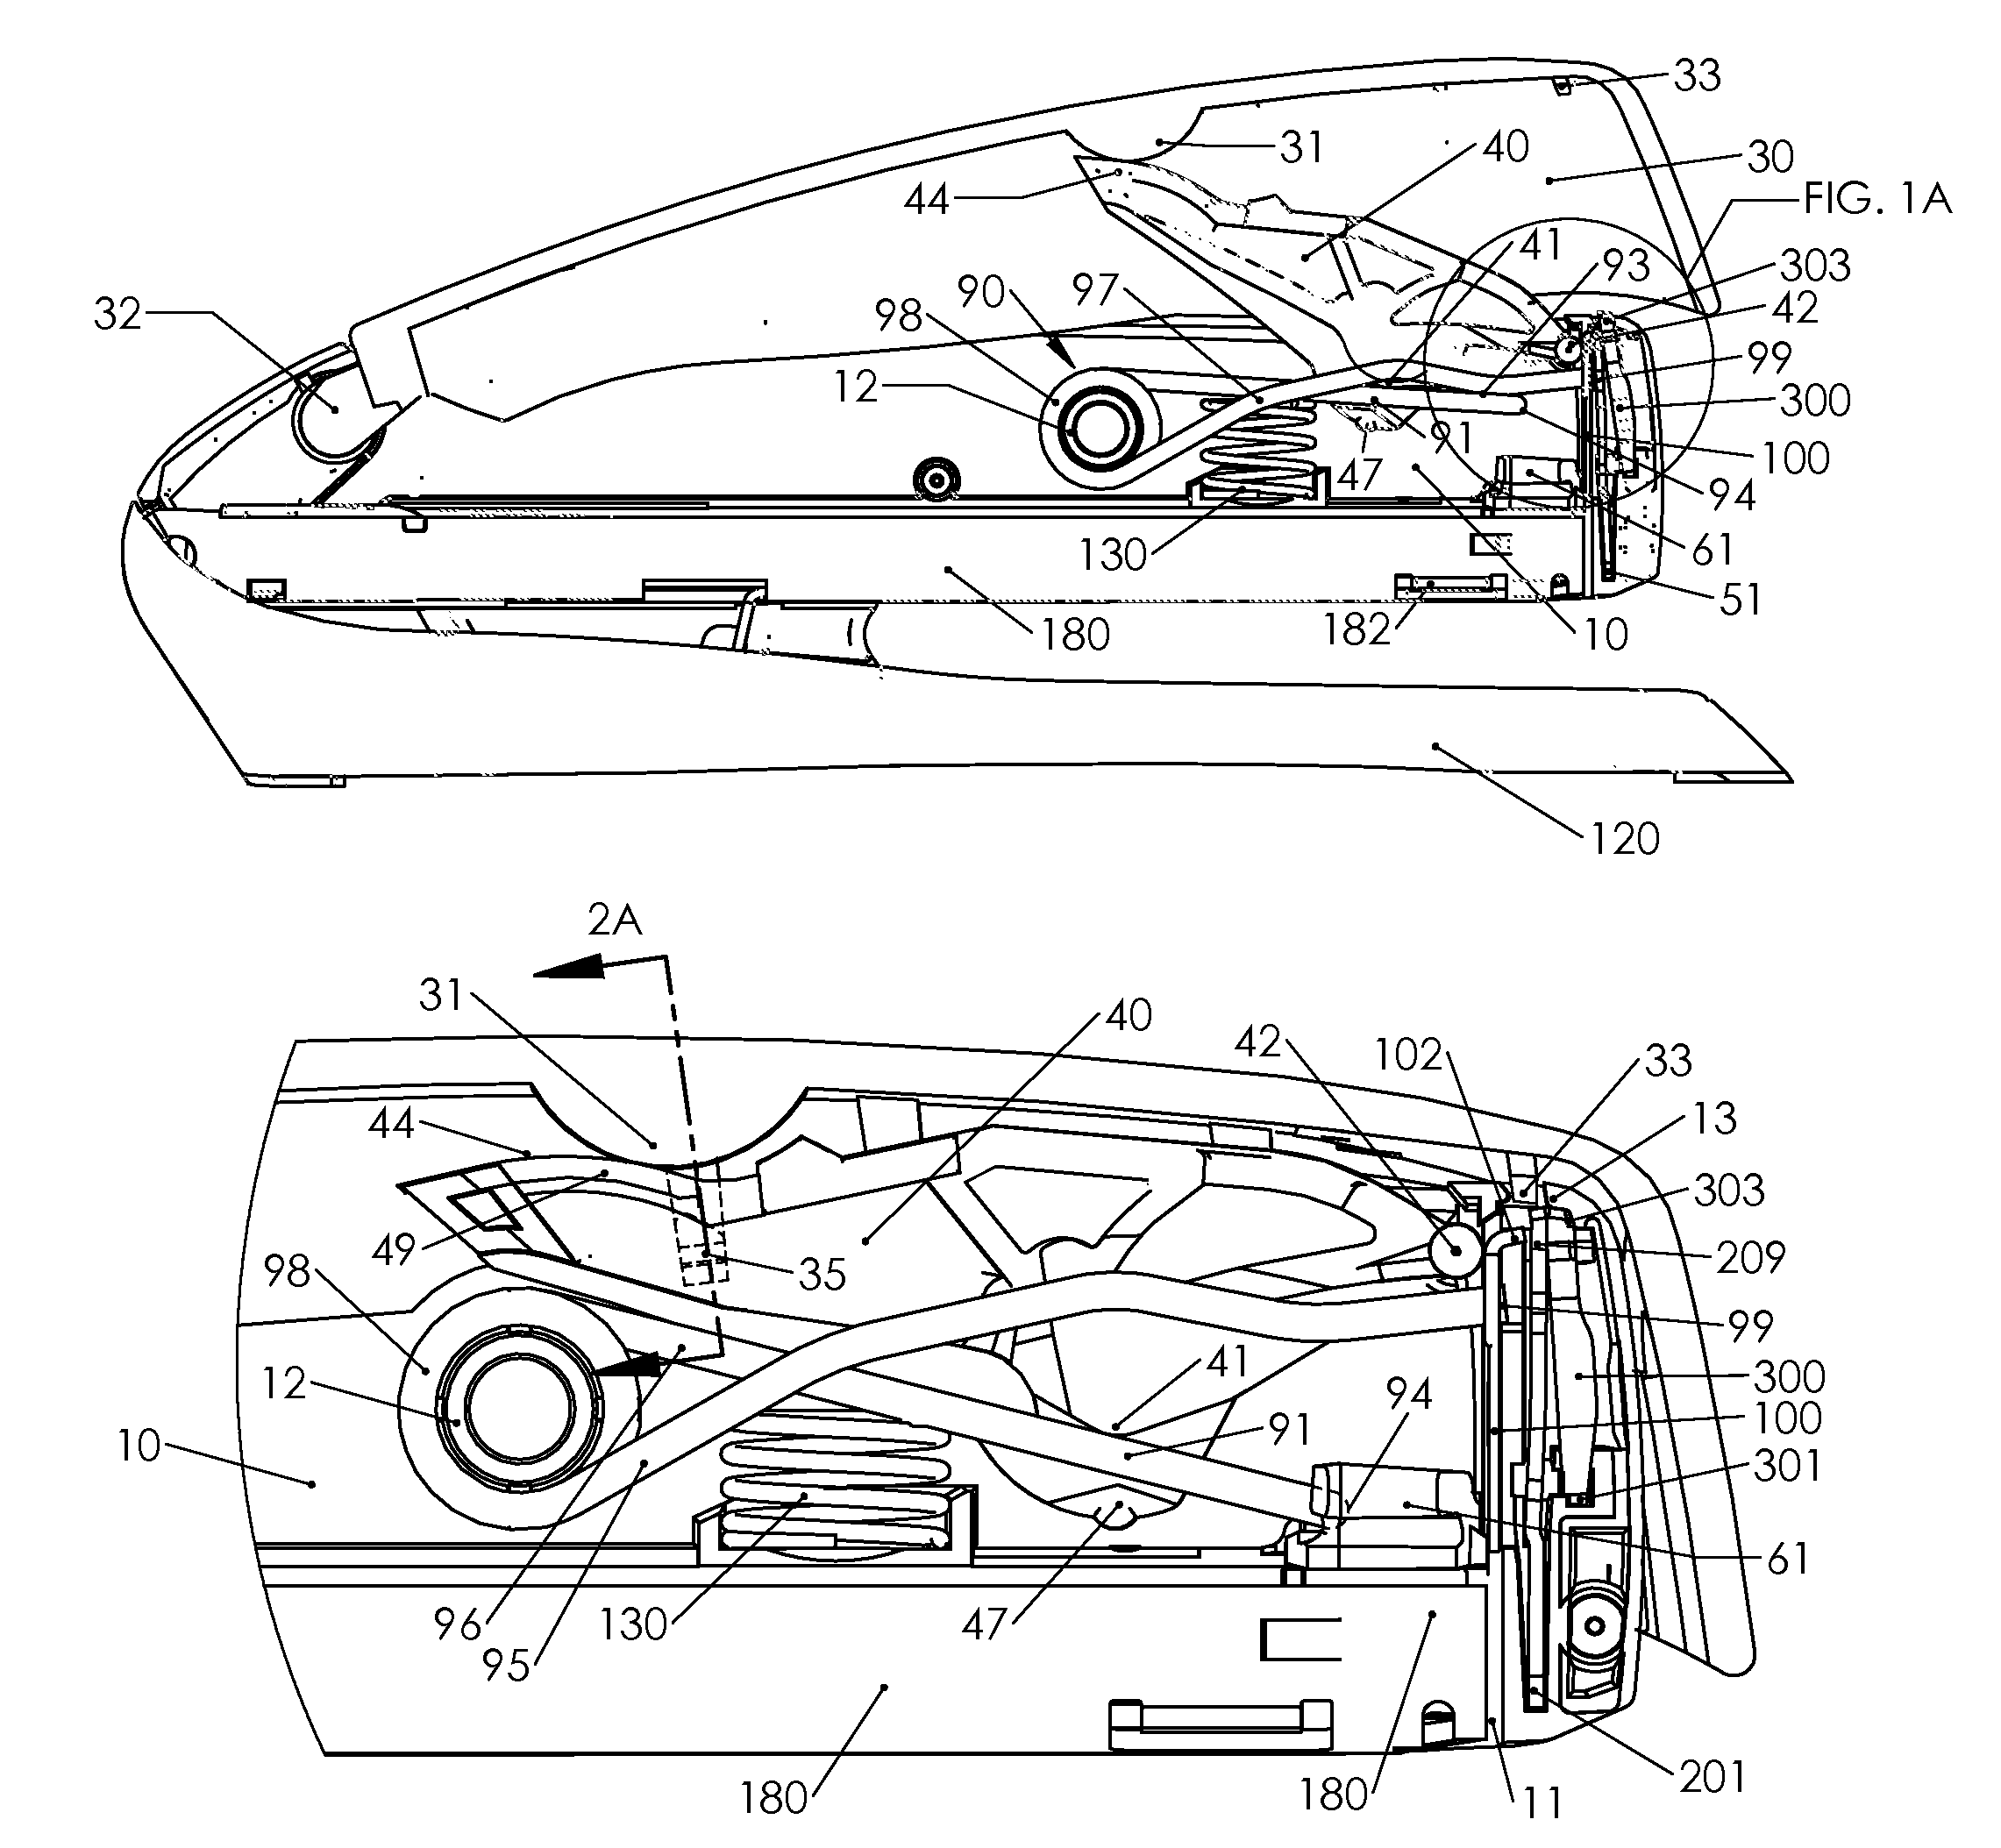 Power spring configurations for a fastening device